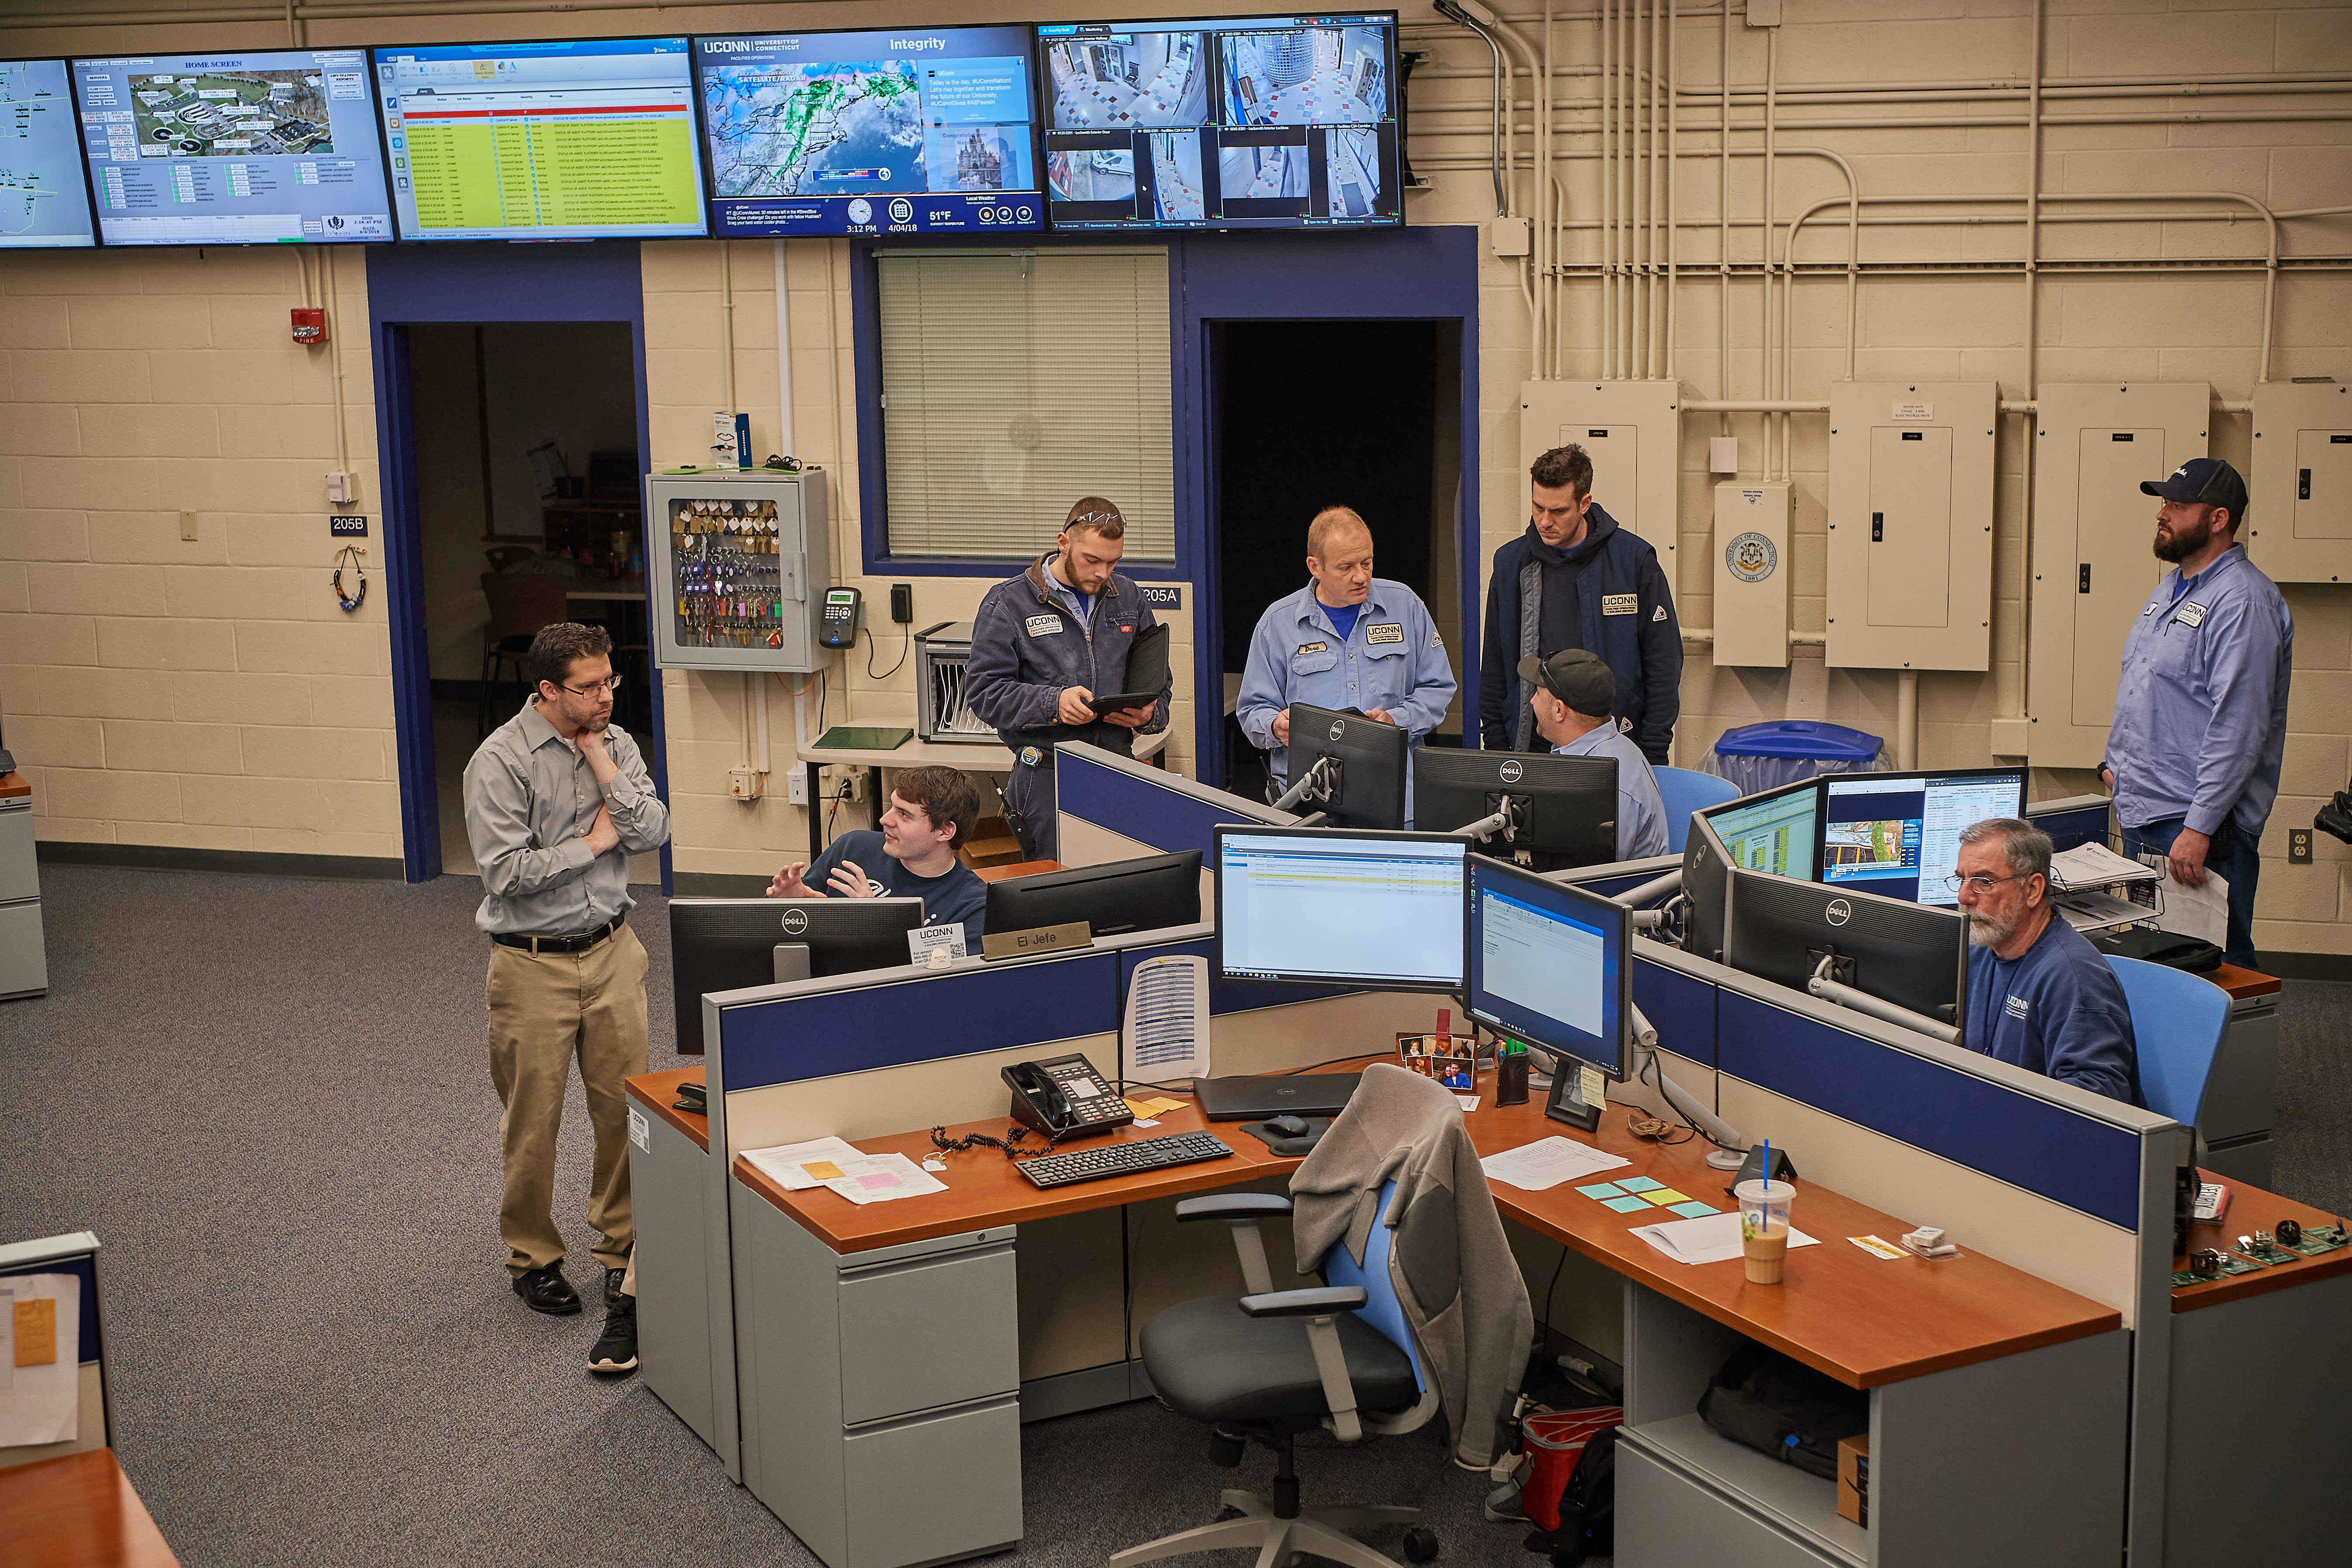 A view of the Facilities Operations Center on April 4, 2018. (Peter Morenus/UConn Photo)